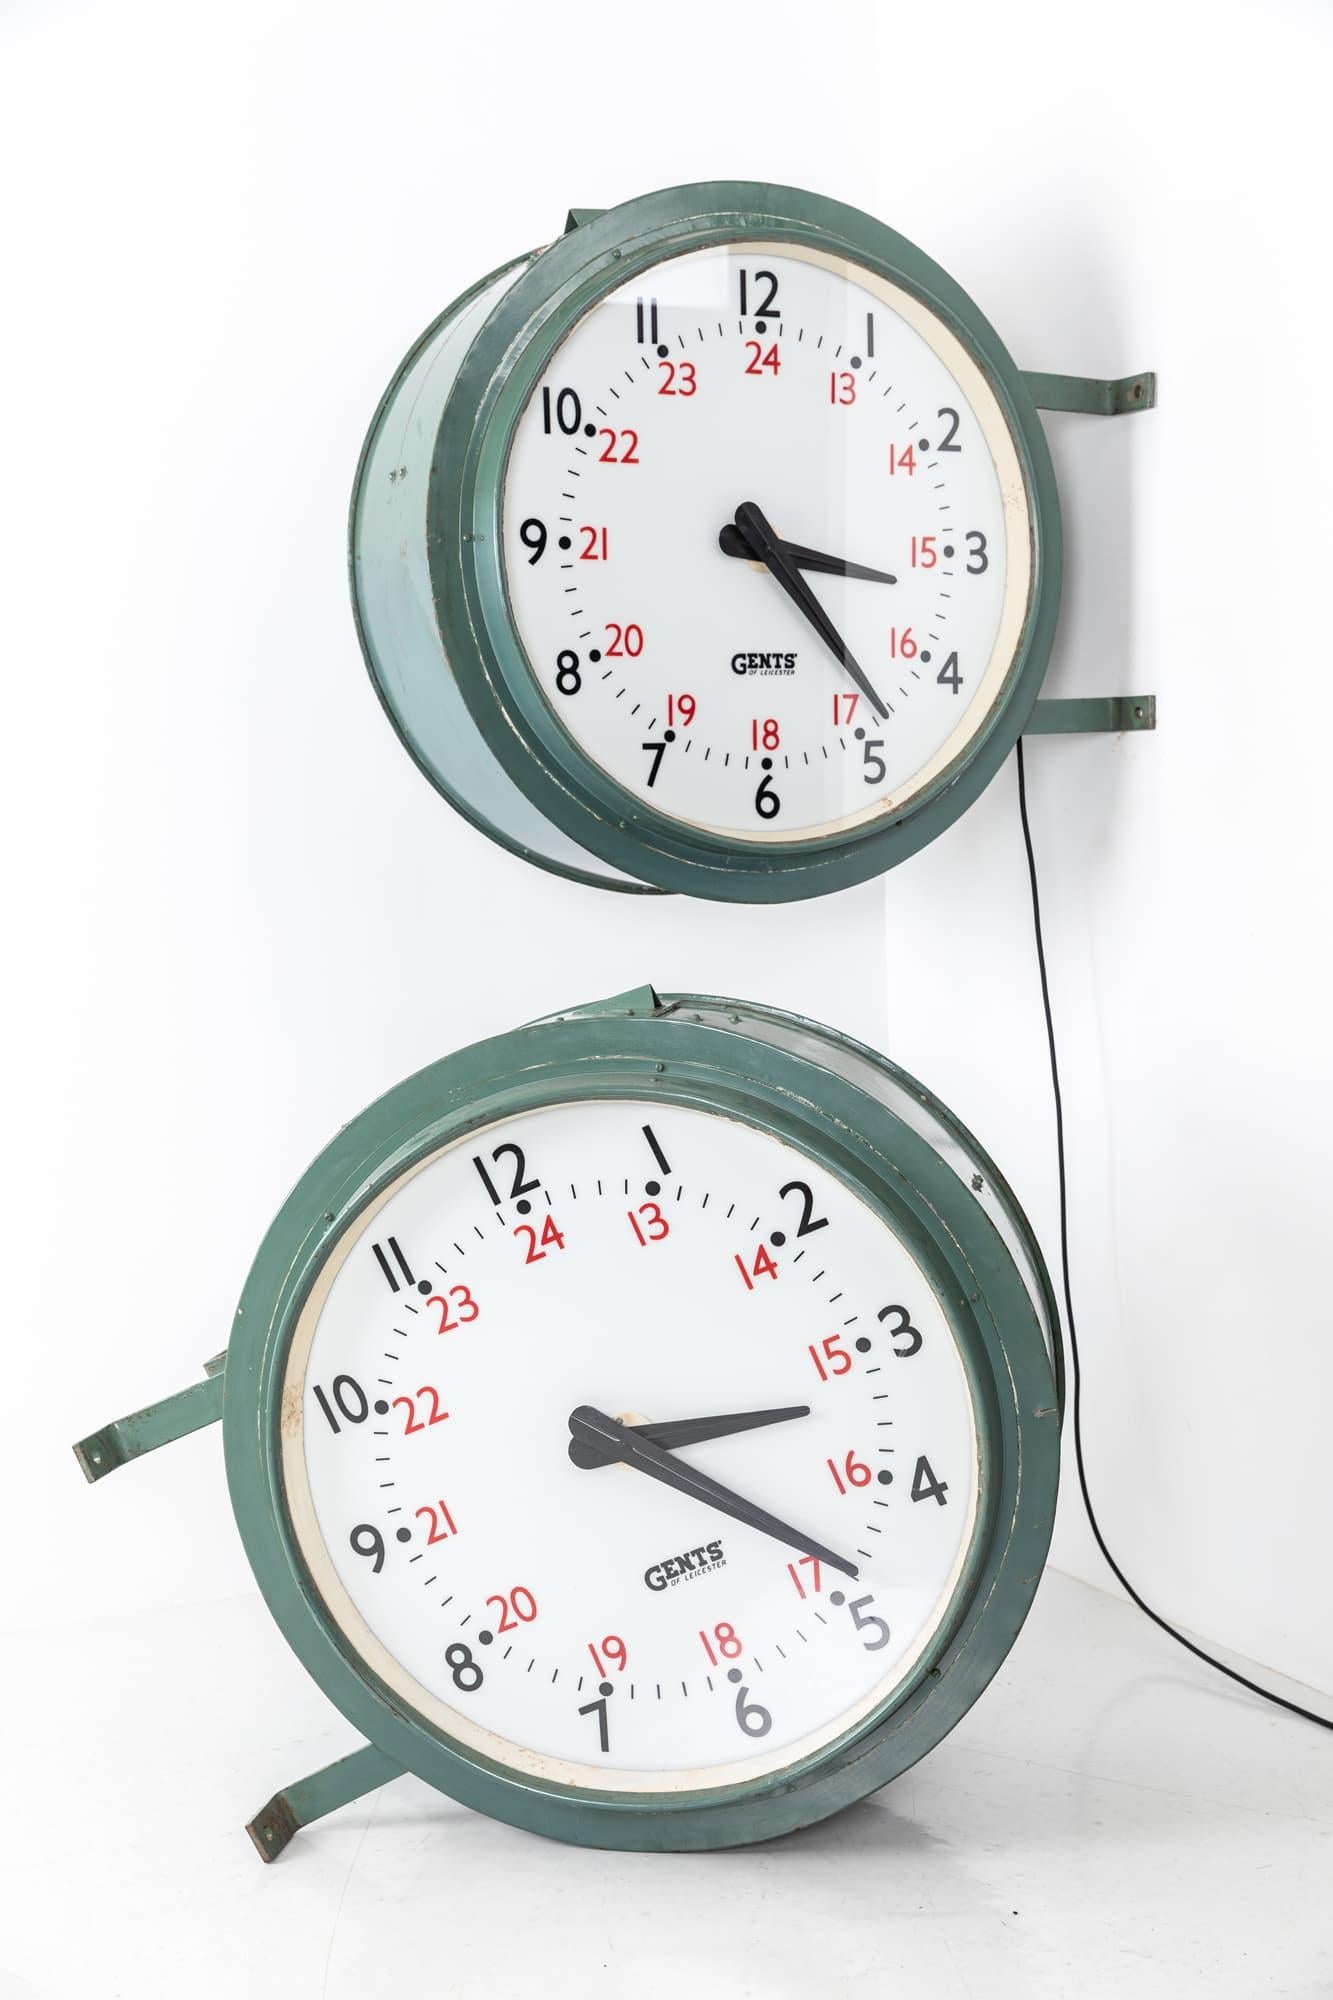 

An incredible pair of large illuminated railway clocks made in England by Gents of Leicester. c.1930

Believed to have originally hung in Cardiff Central railway station. Double sided wall mounted drum clocks in fantastic original condition.